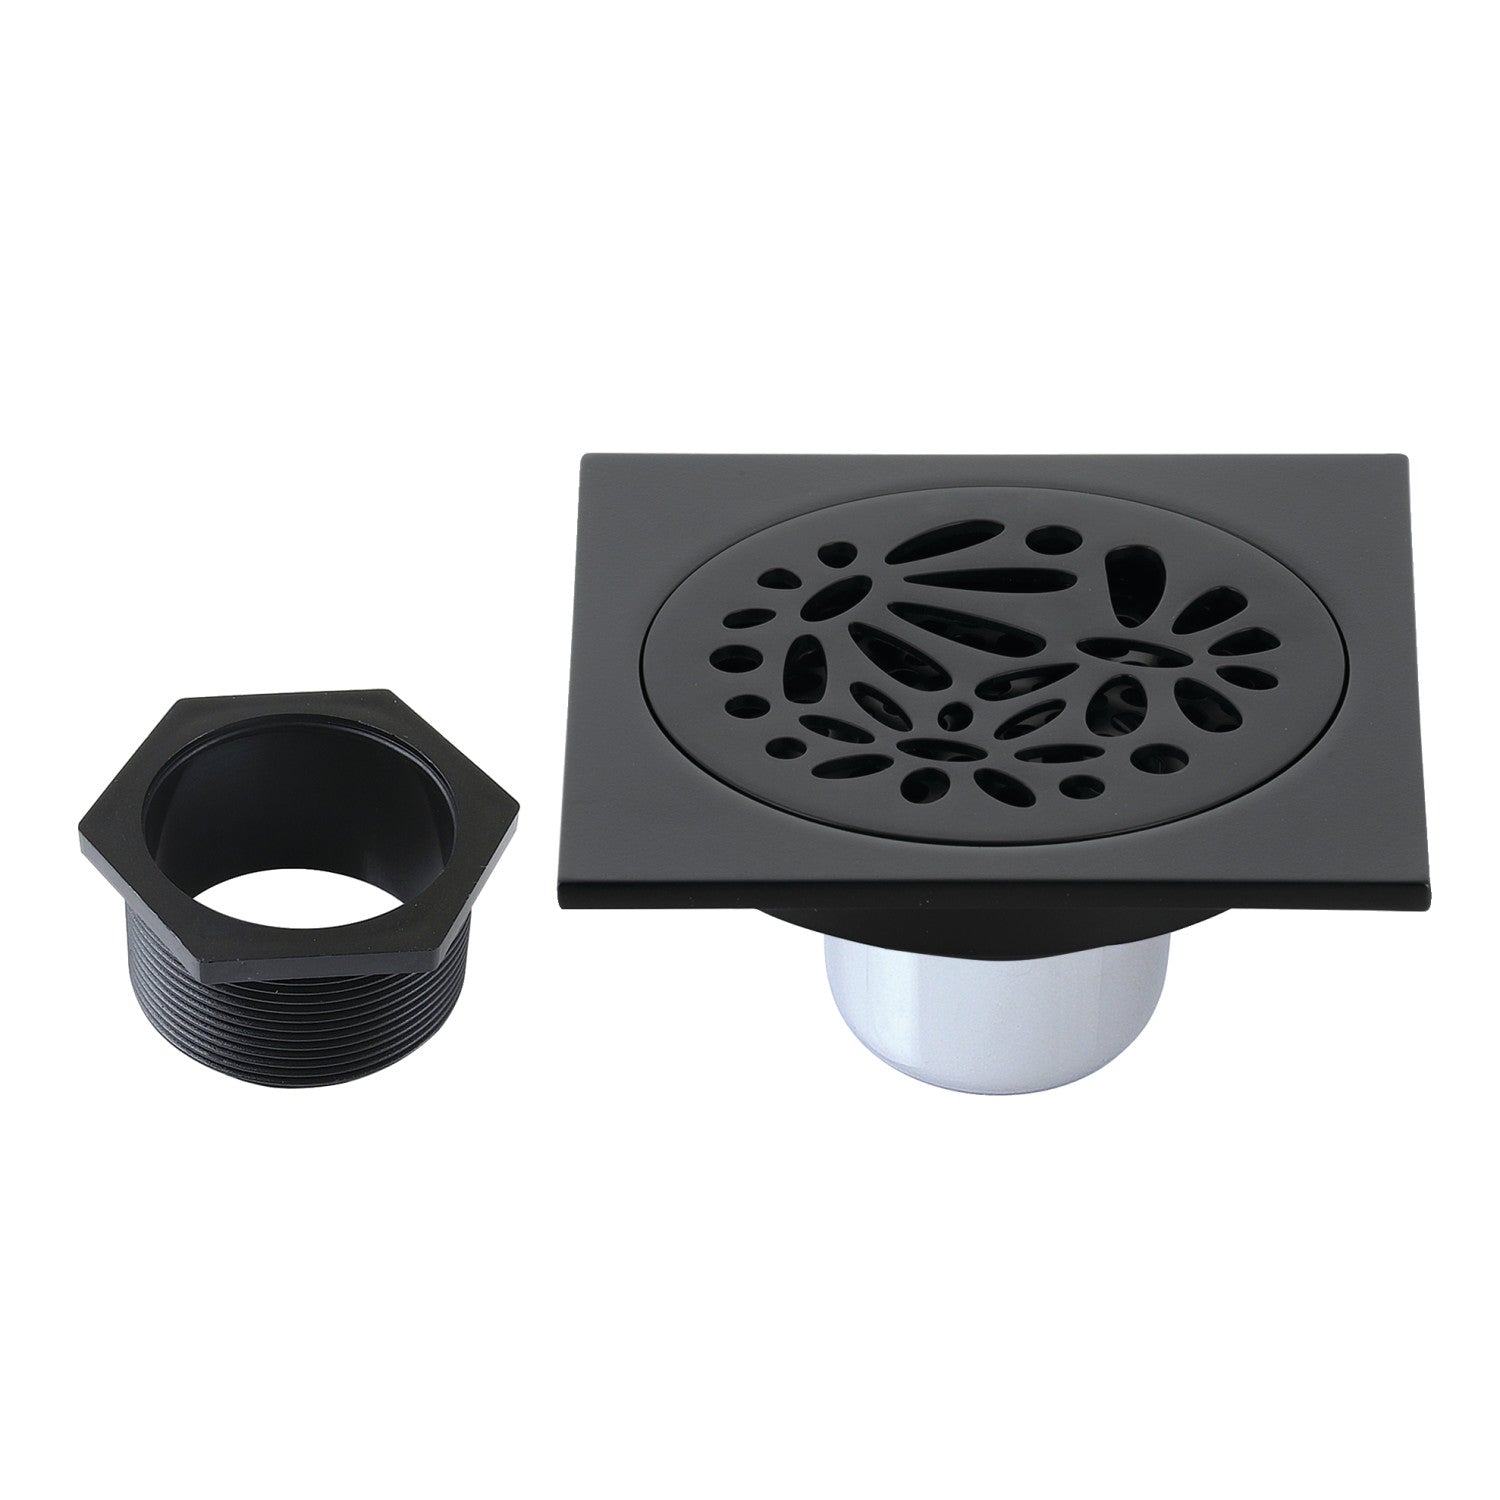 6 inch Matte Black Square Shower Drain with Hair Trap Set (2 Designs)